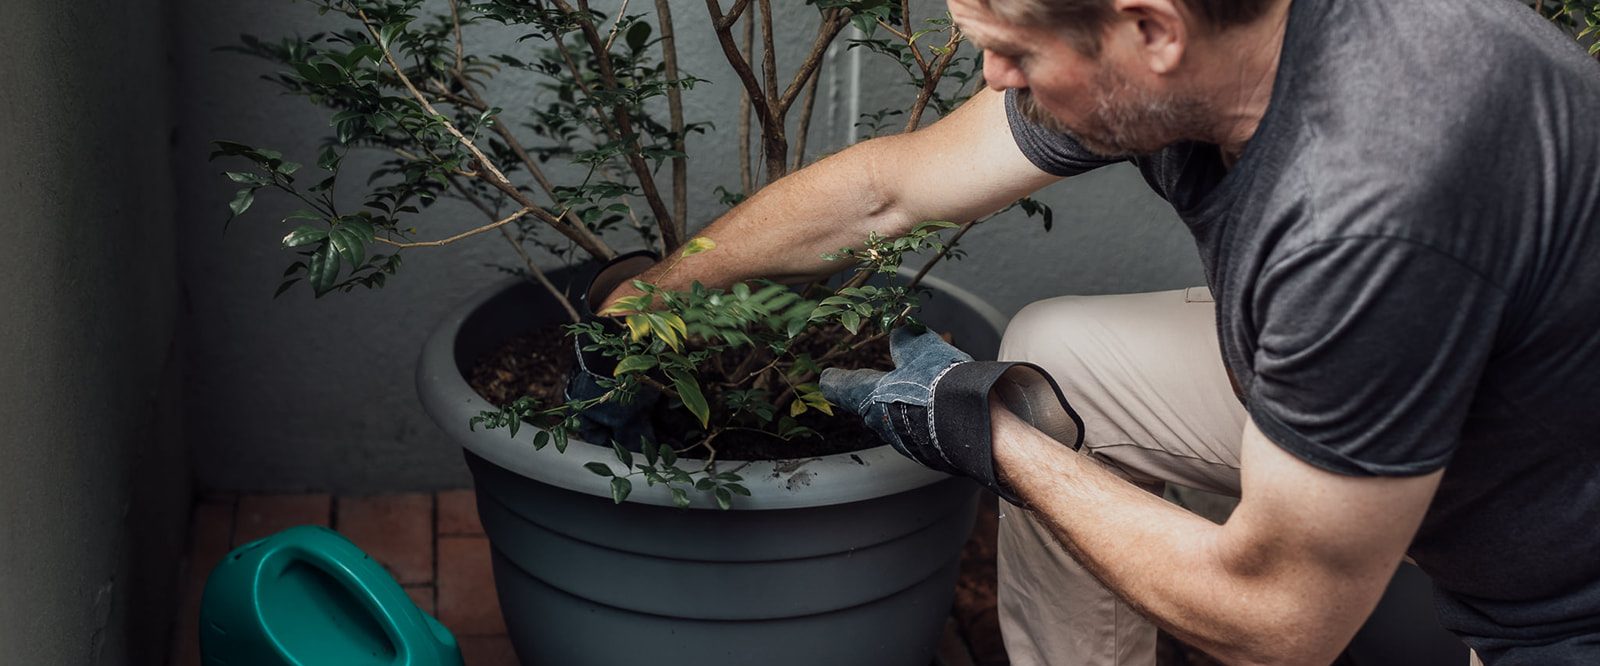 A man gardening with a potted plant.